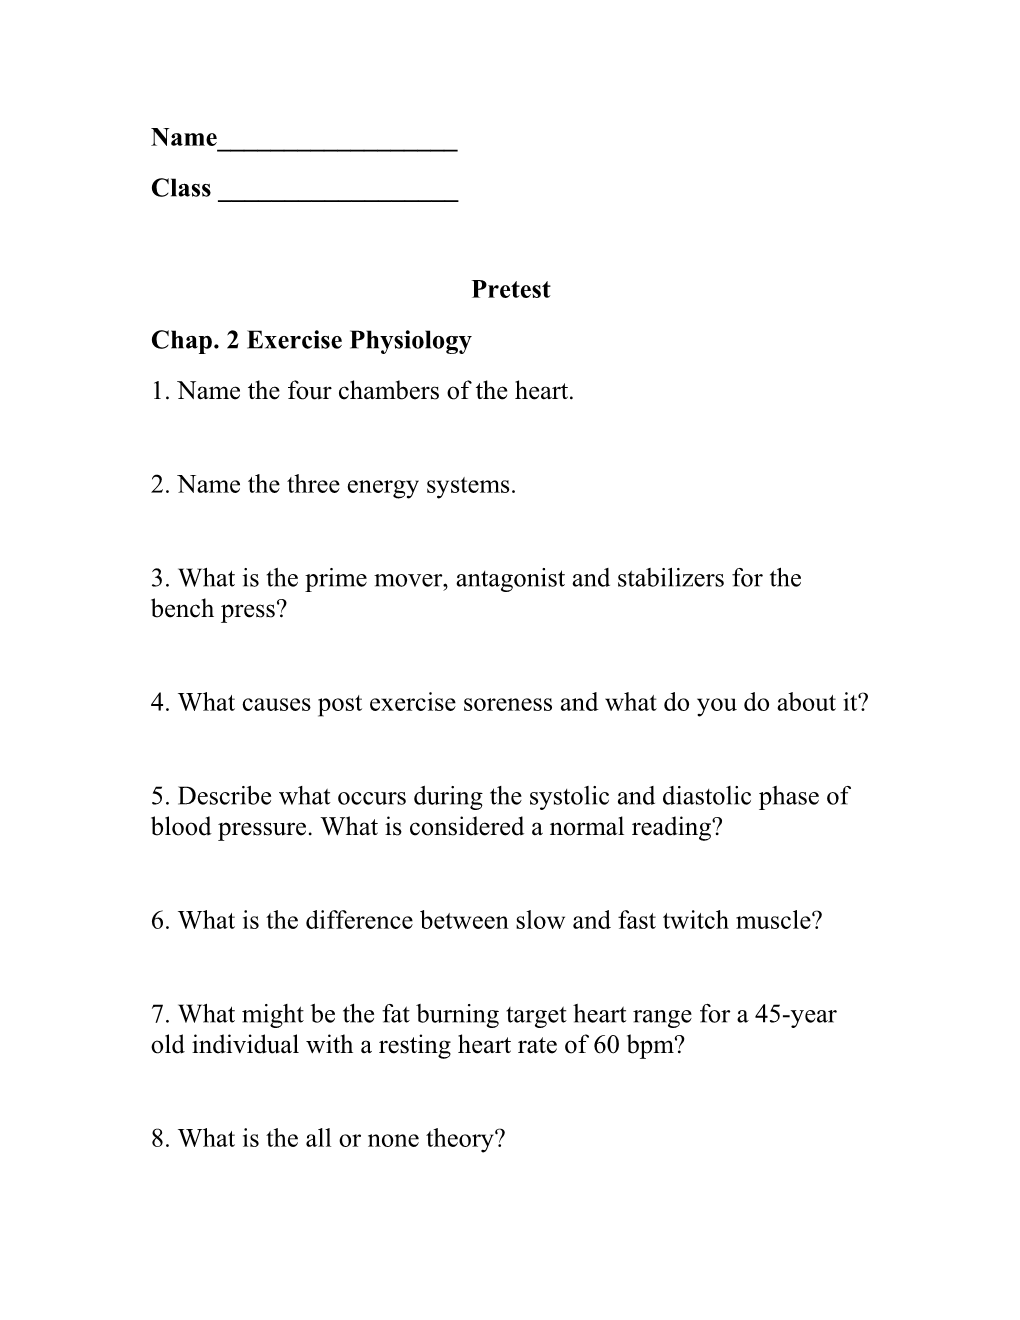 Chap. 2 Exercise Physiology